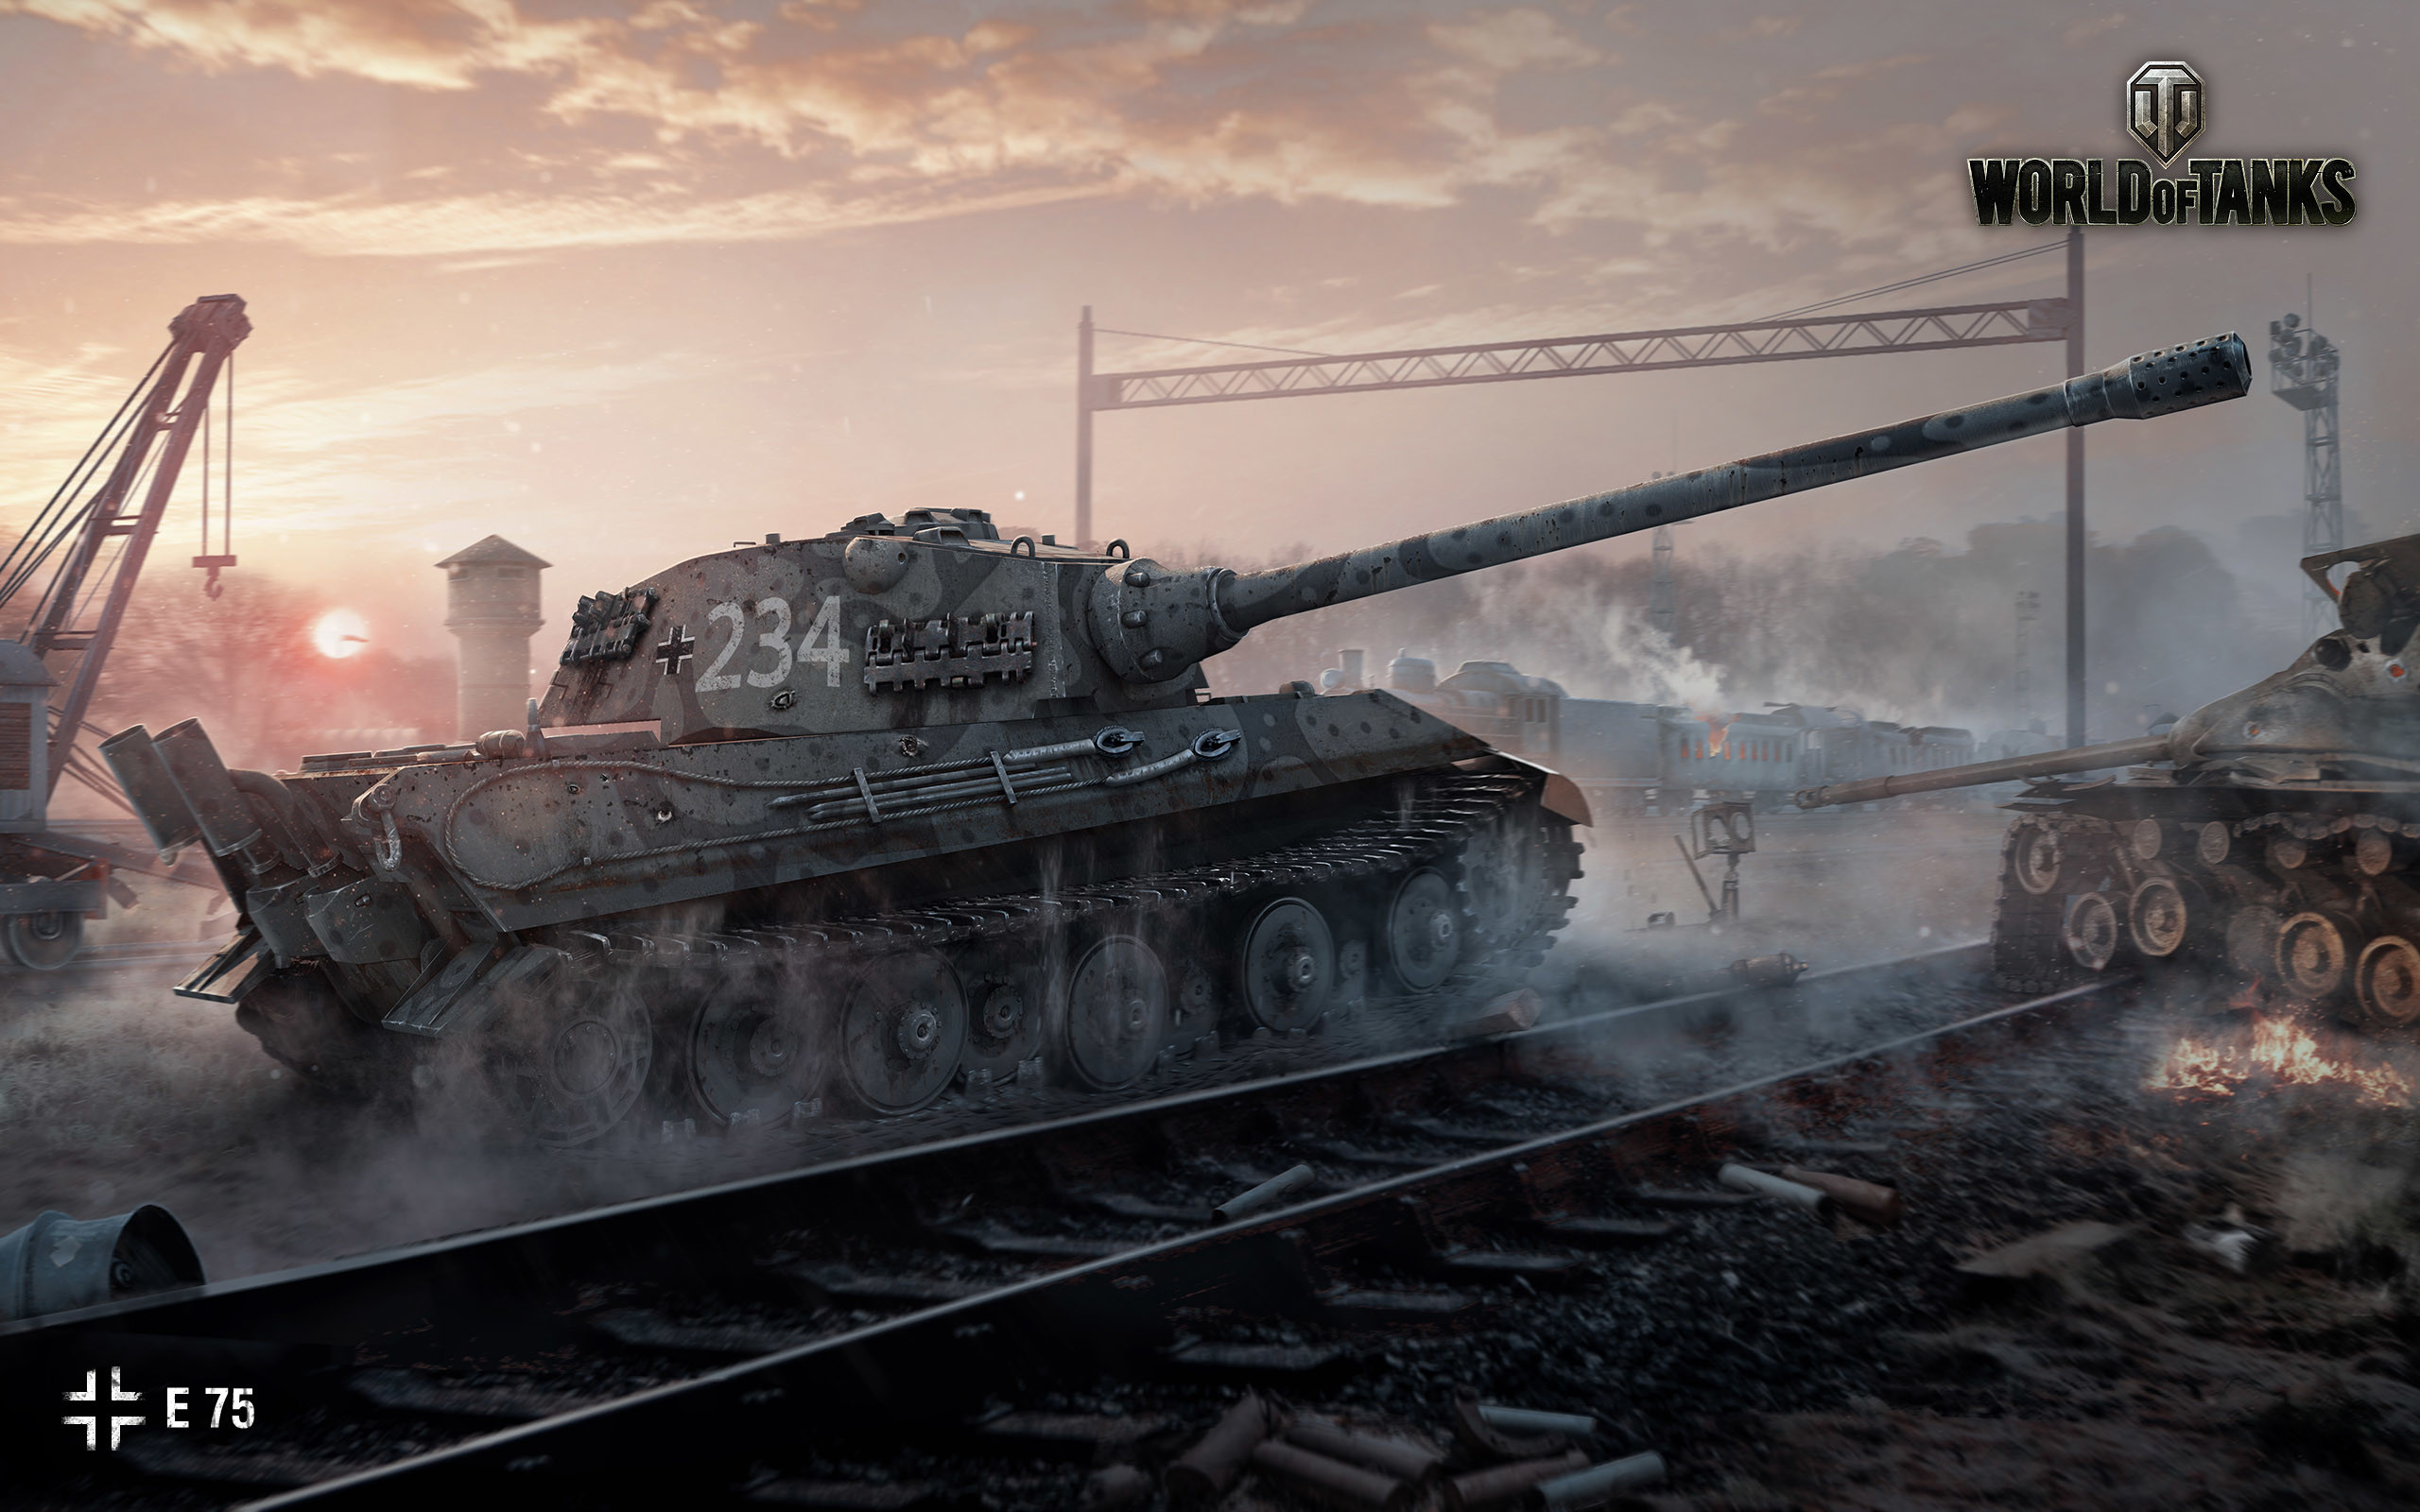 2560x1600 Full HD 1080p World of tanks Wallpapers HD, Desktop Backgrounds | Images  Wallpapers | Pinterest | Hd desktop, Desktop backgrounds and Wallpaper